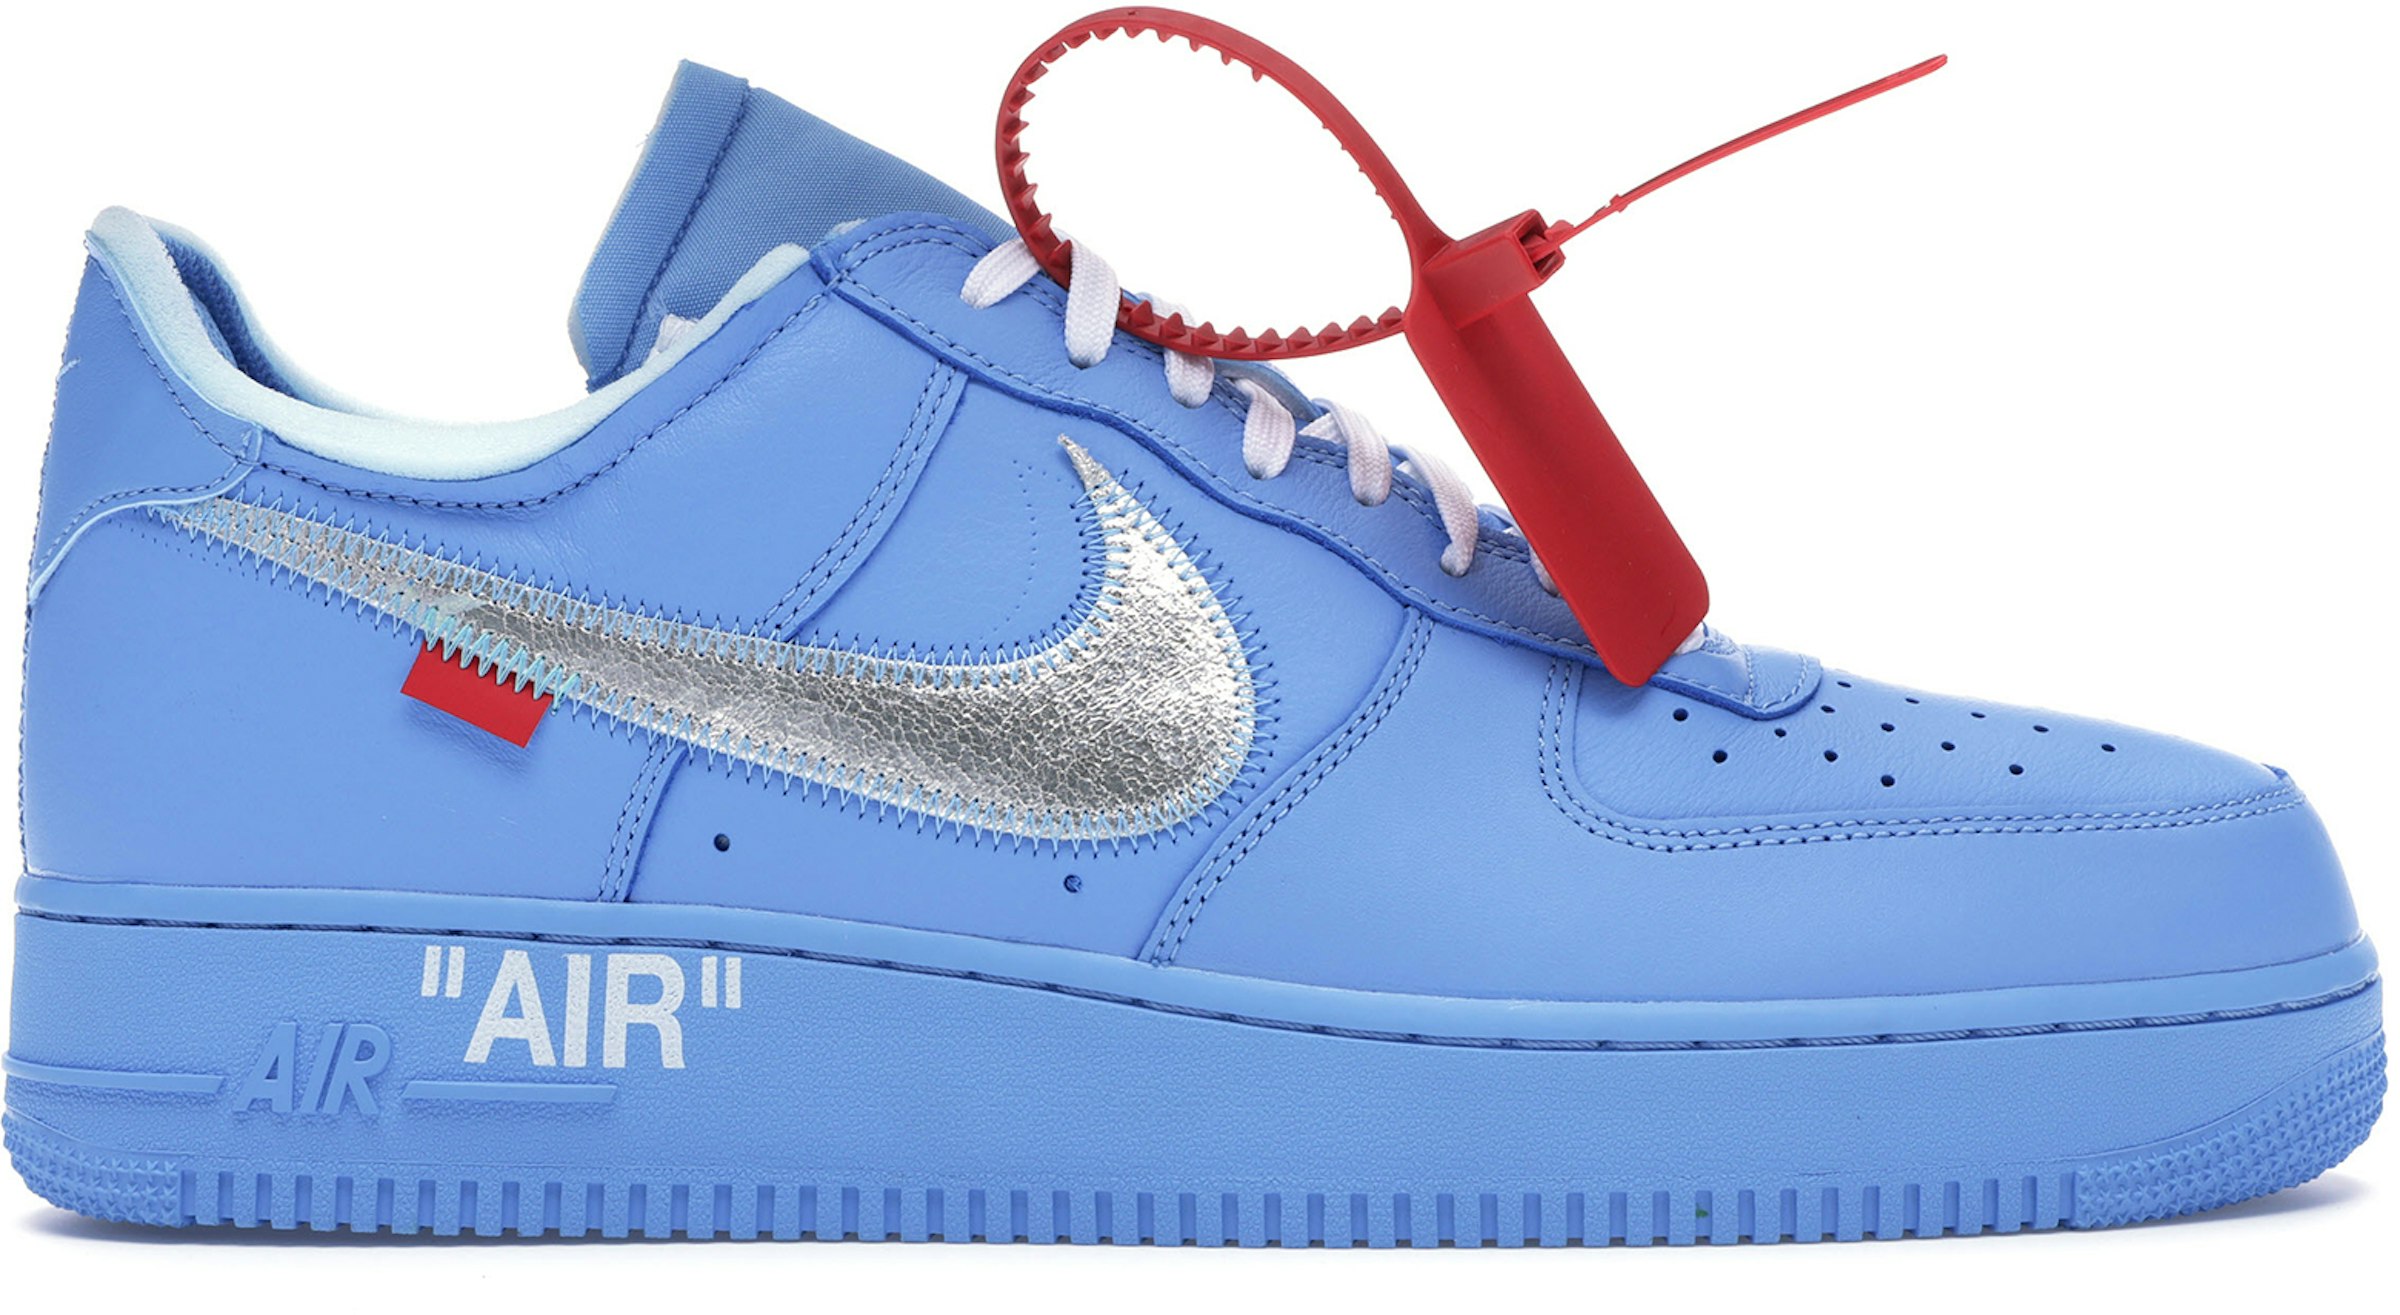 Nike Air Force 1 Low Off-White MCA University Blue - CI1173-400 - US